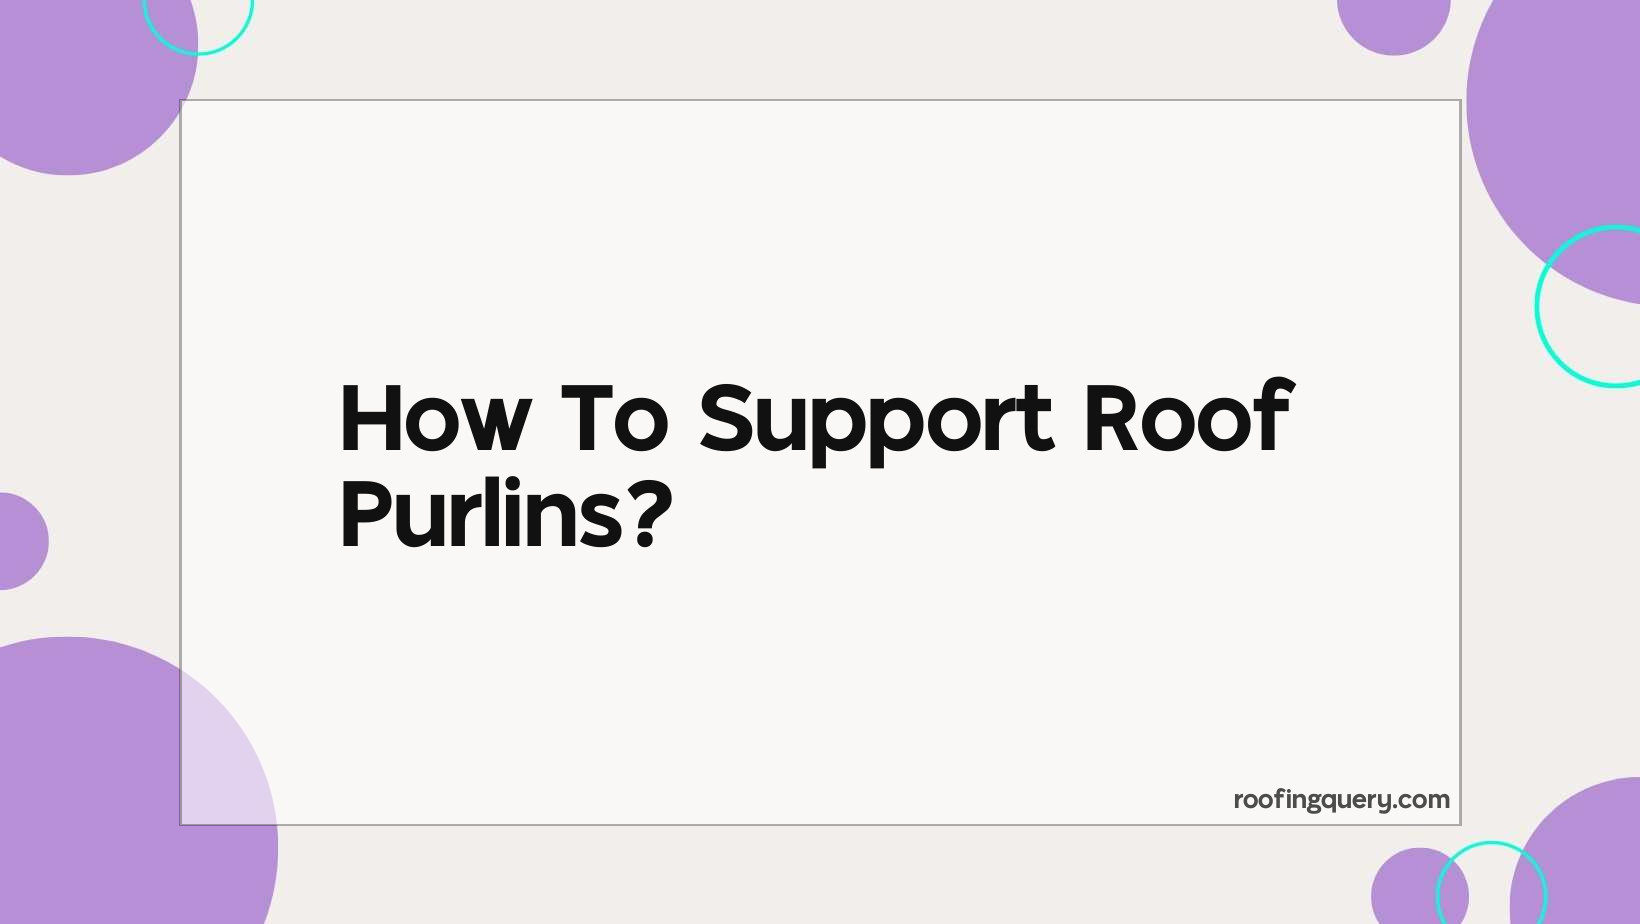 How To Support Roof Purlins?